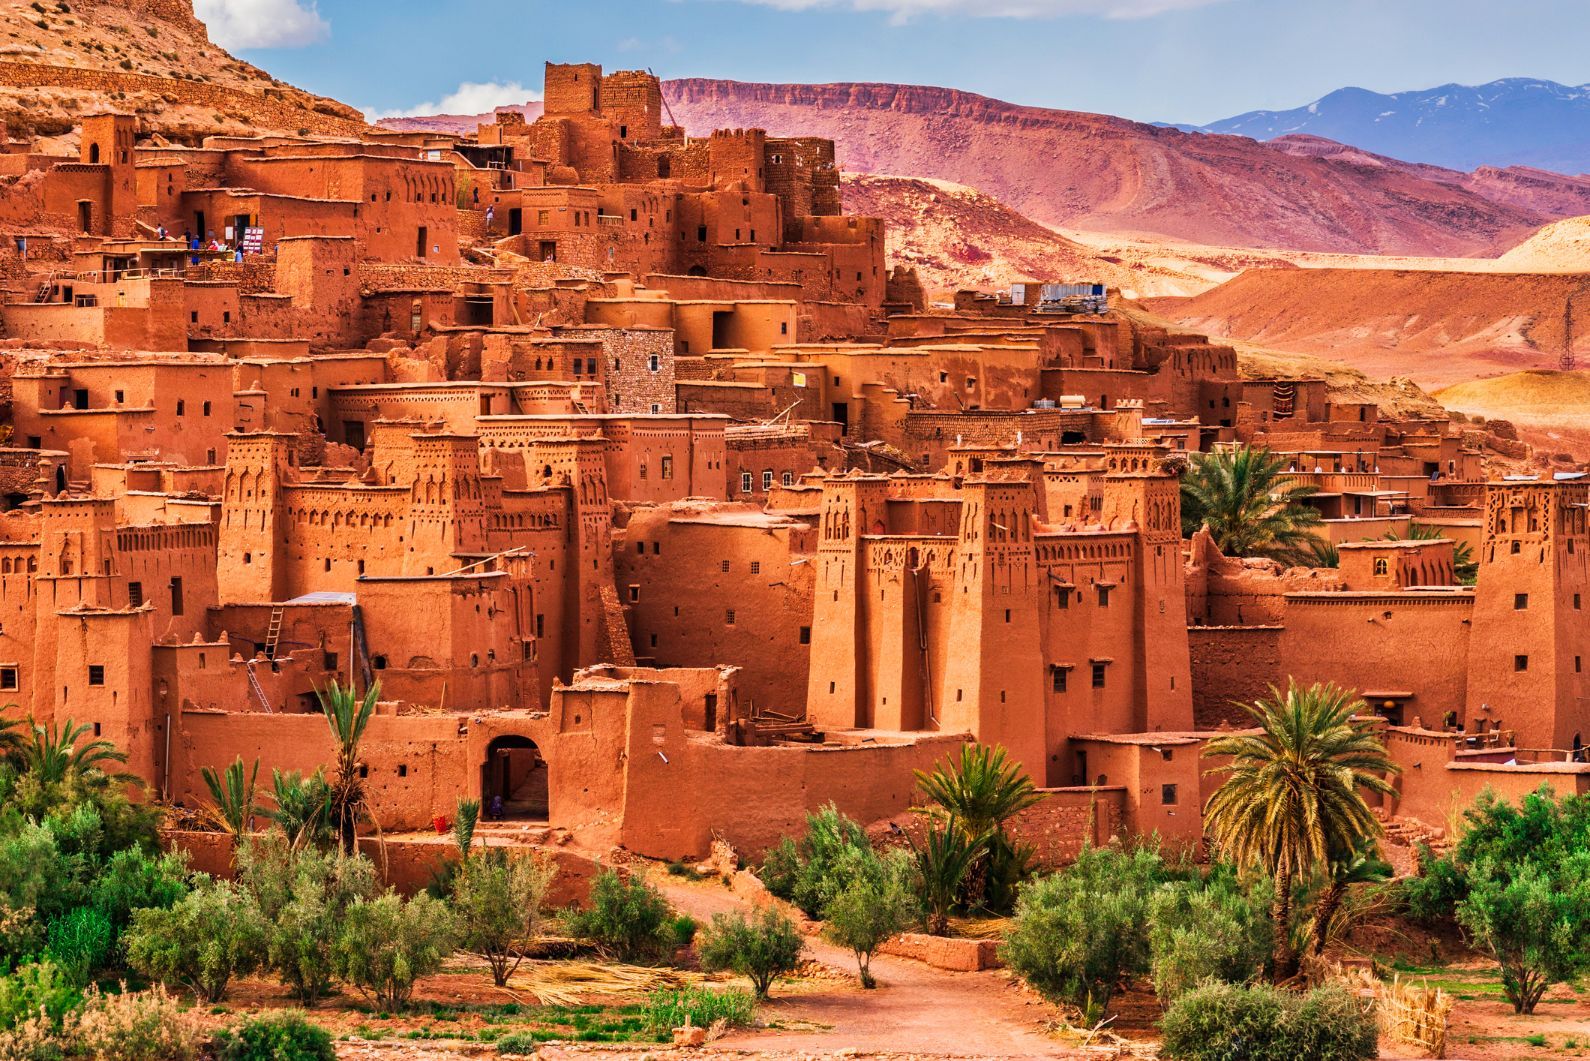 Ait Benhaddou, an Ancient city in Morocco in North Africa. Photo: Getty Beautiful Landscapes